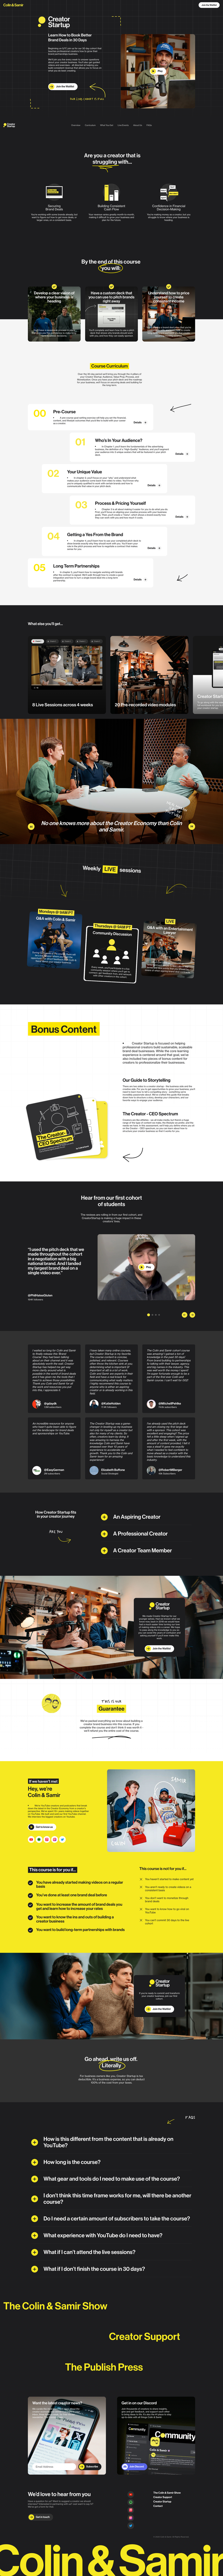 Colin & Samir Landing Page Example: Colin and Samir are YouTube creators and podcasters that break down the latest in the Creator Economy from a creator's perspective.